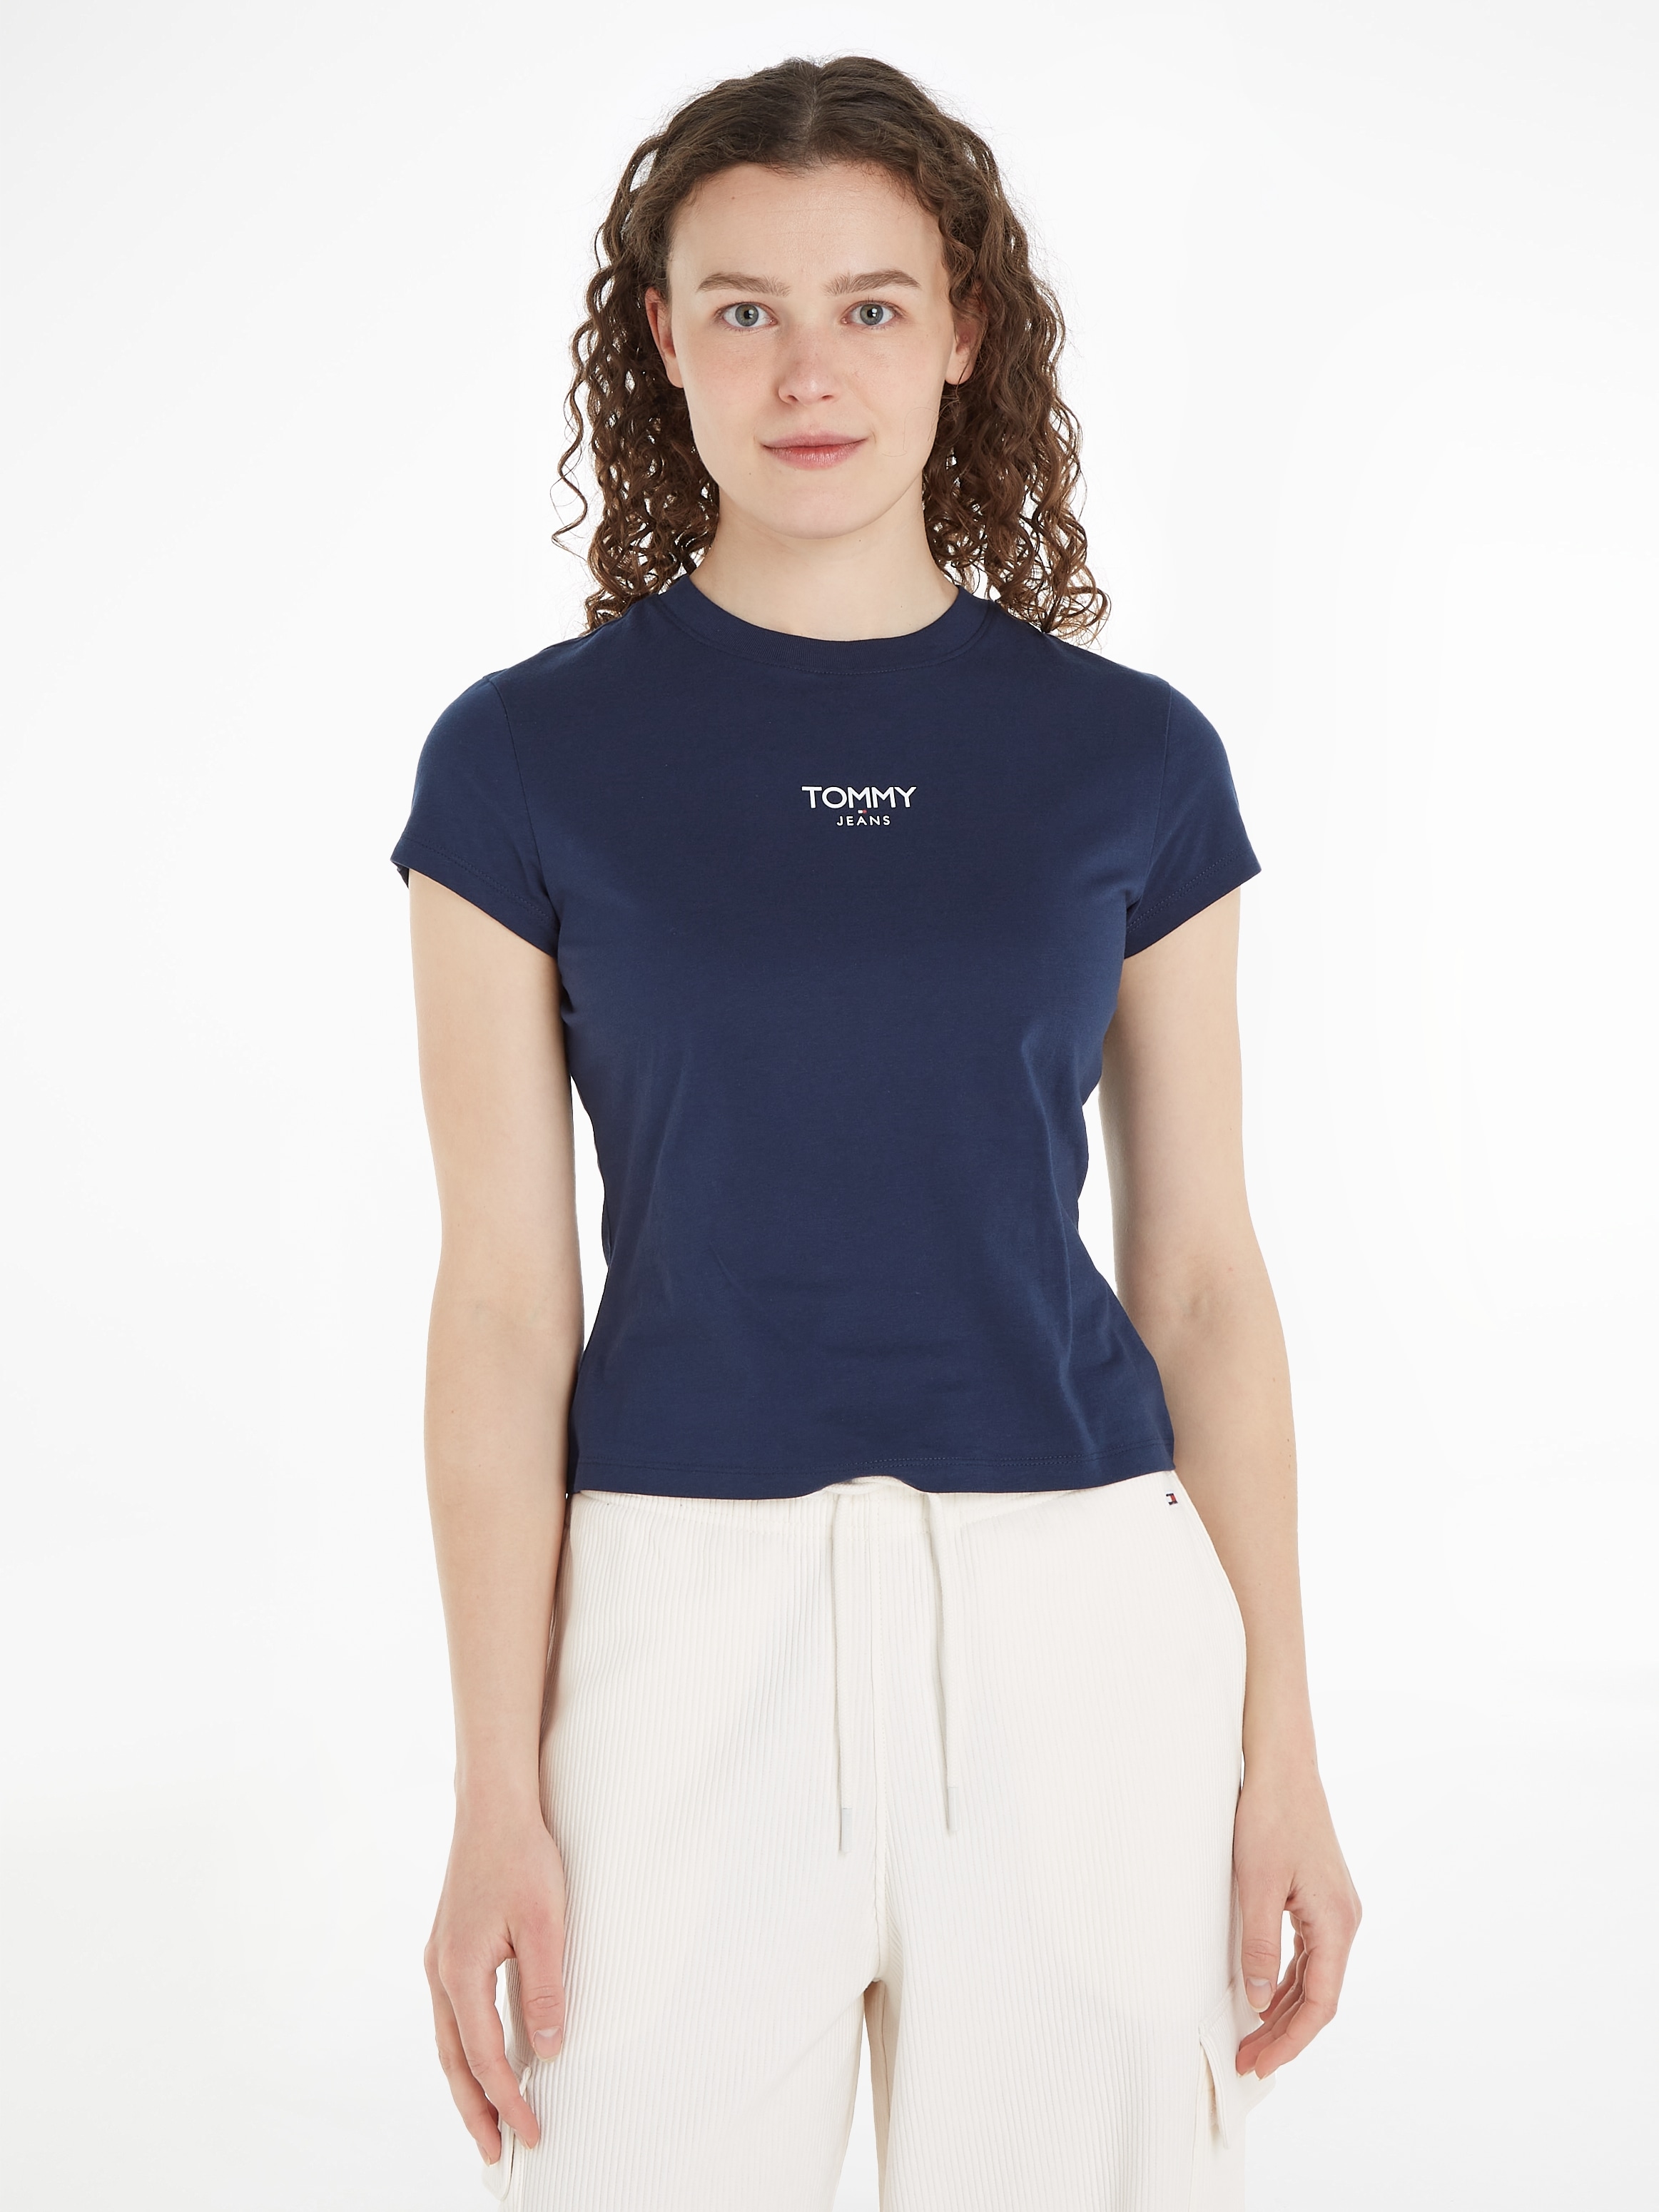 OTTOversand Jeans Tommy T-Shirt Tommy BBY mit LOGO »TJW Logo SS«, 1 ESSENTIAL bei Jeans